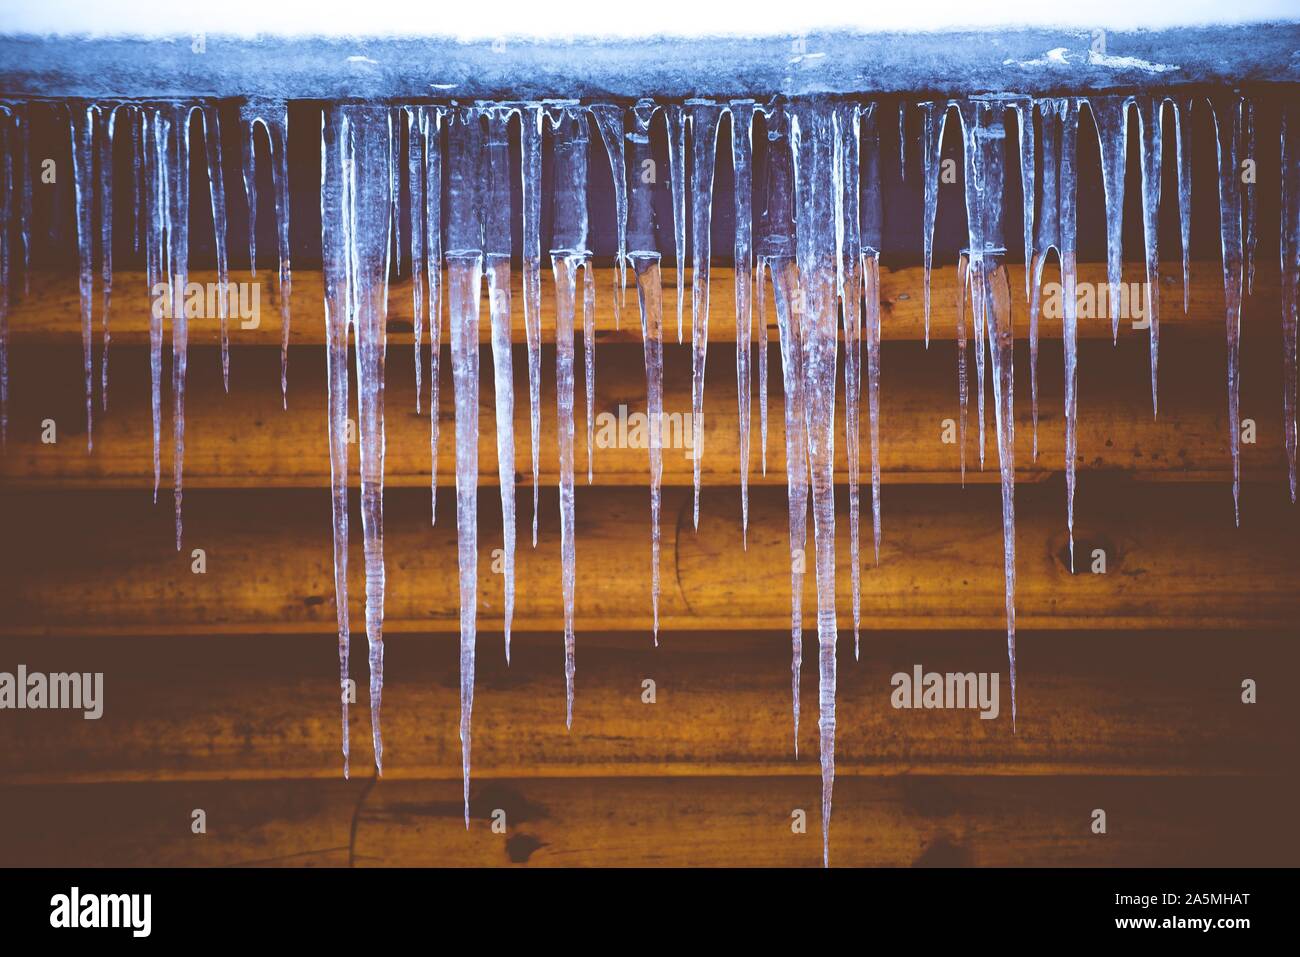 Closeup shot of ice cycles with a wooden wall in the background Stock Photo